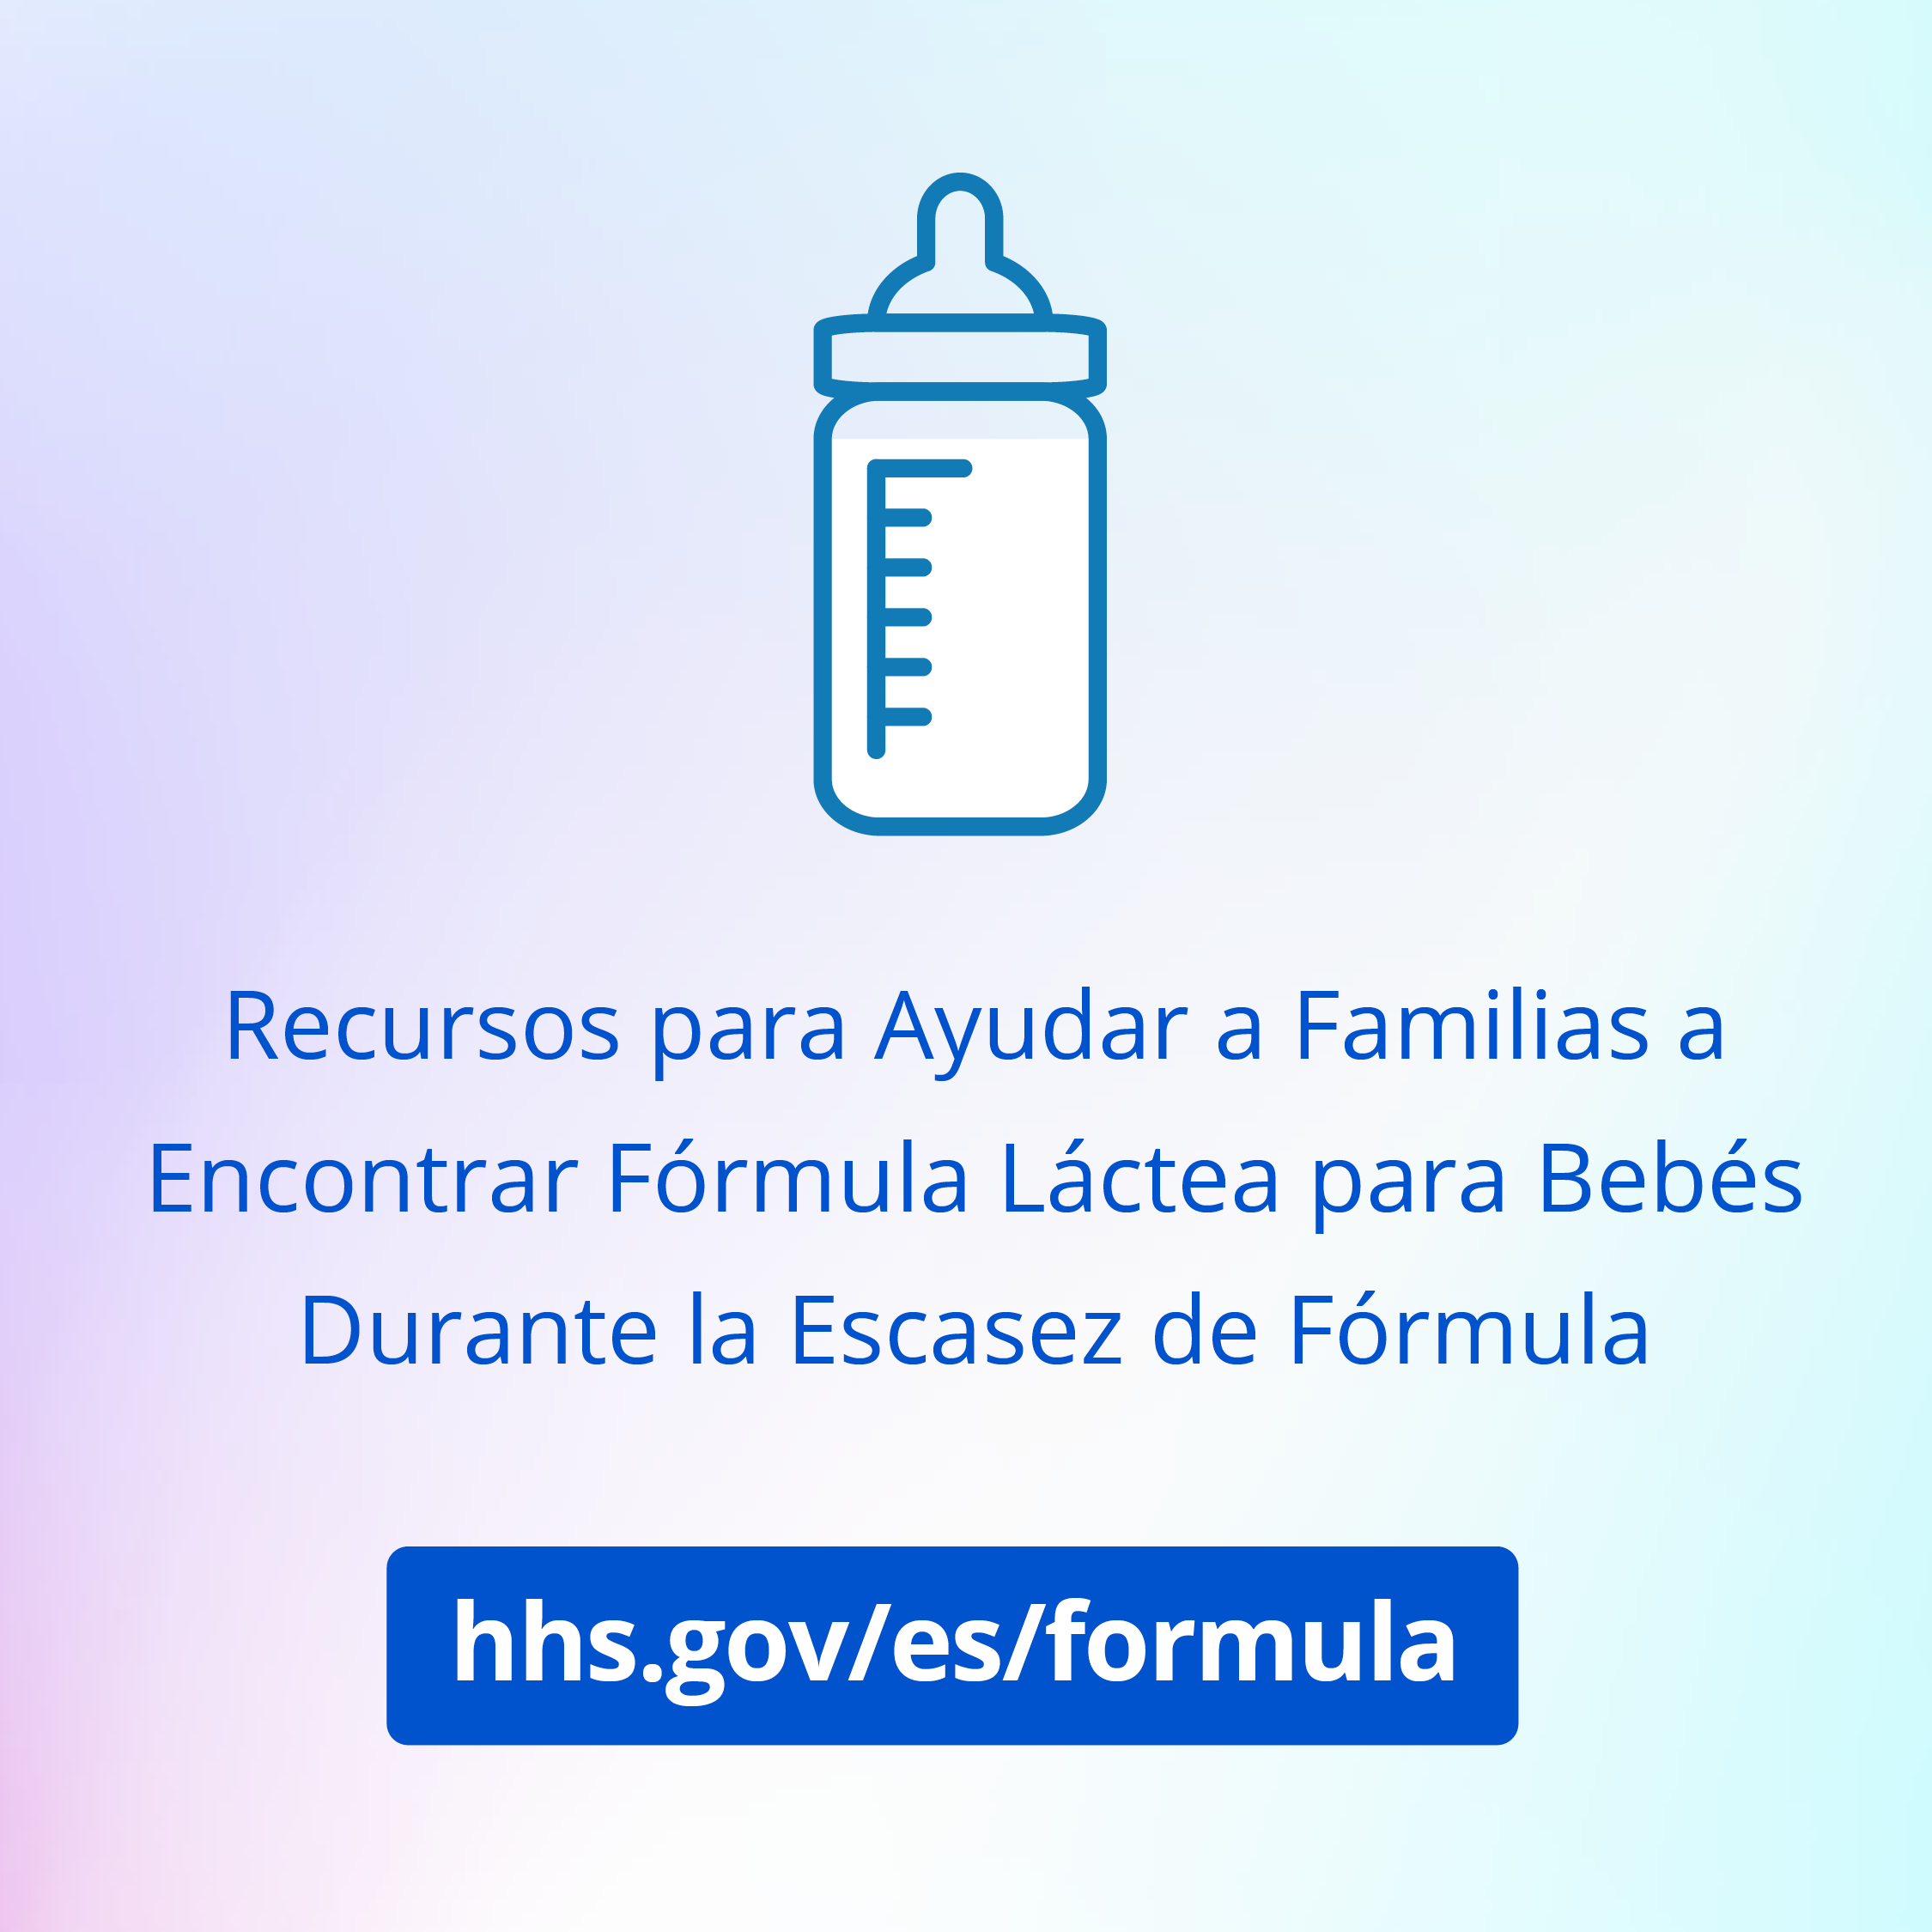 Instagram promo graphic to find resources for the infant formula shortage at hhs.gov/formula in Spanish.